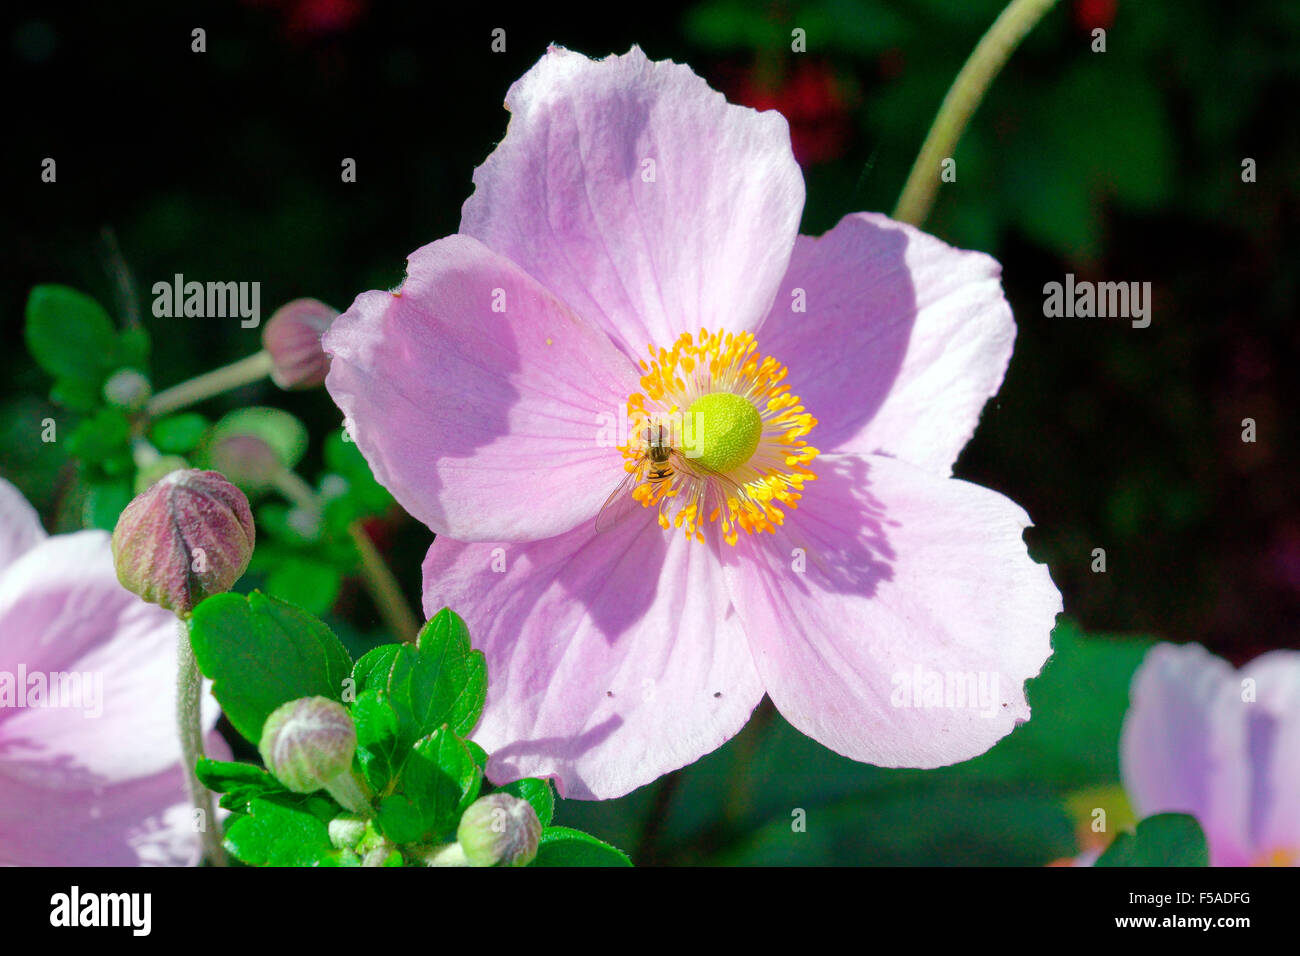 HOVERFLY ON JAPANESE ANEMONES (SEPTEMBER CHARM) Stock Photo